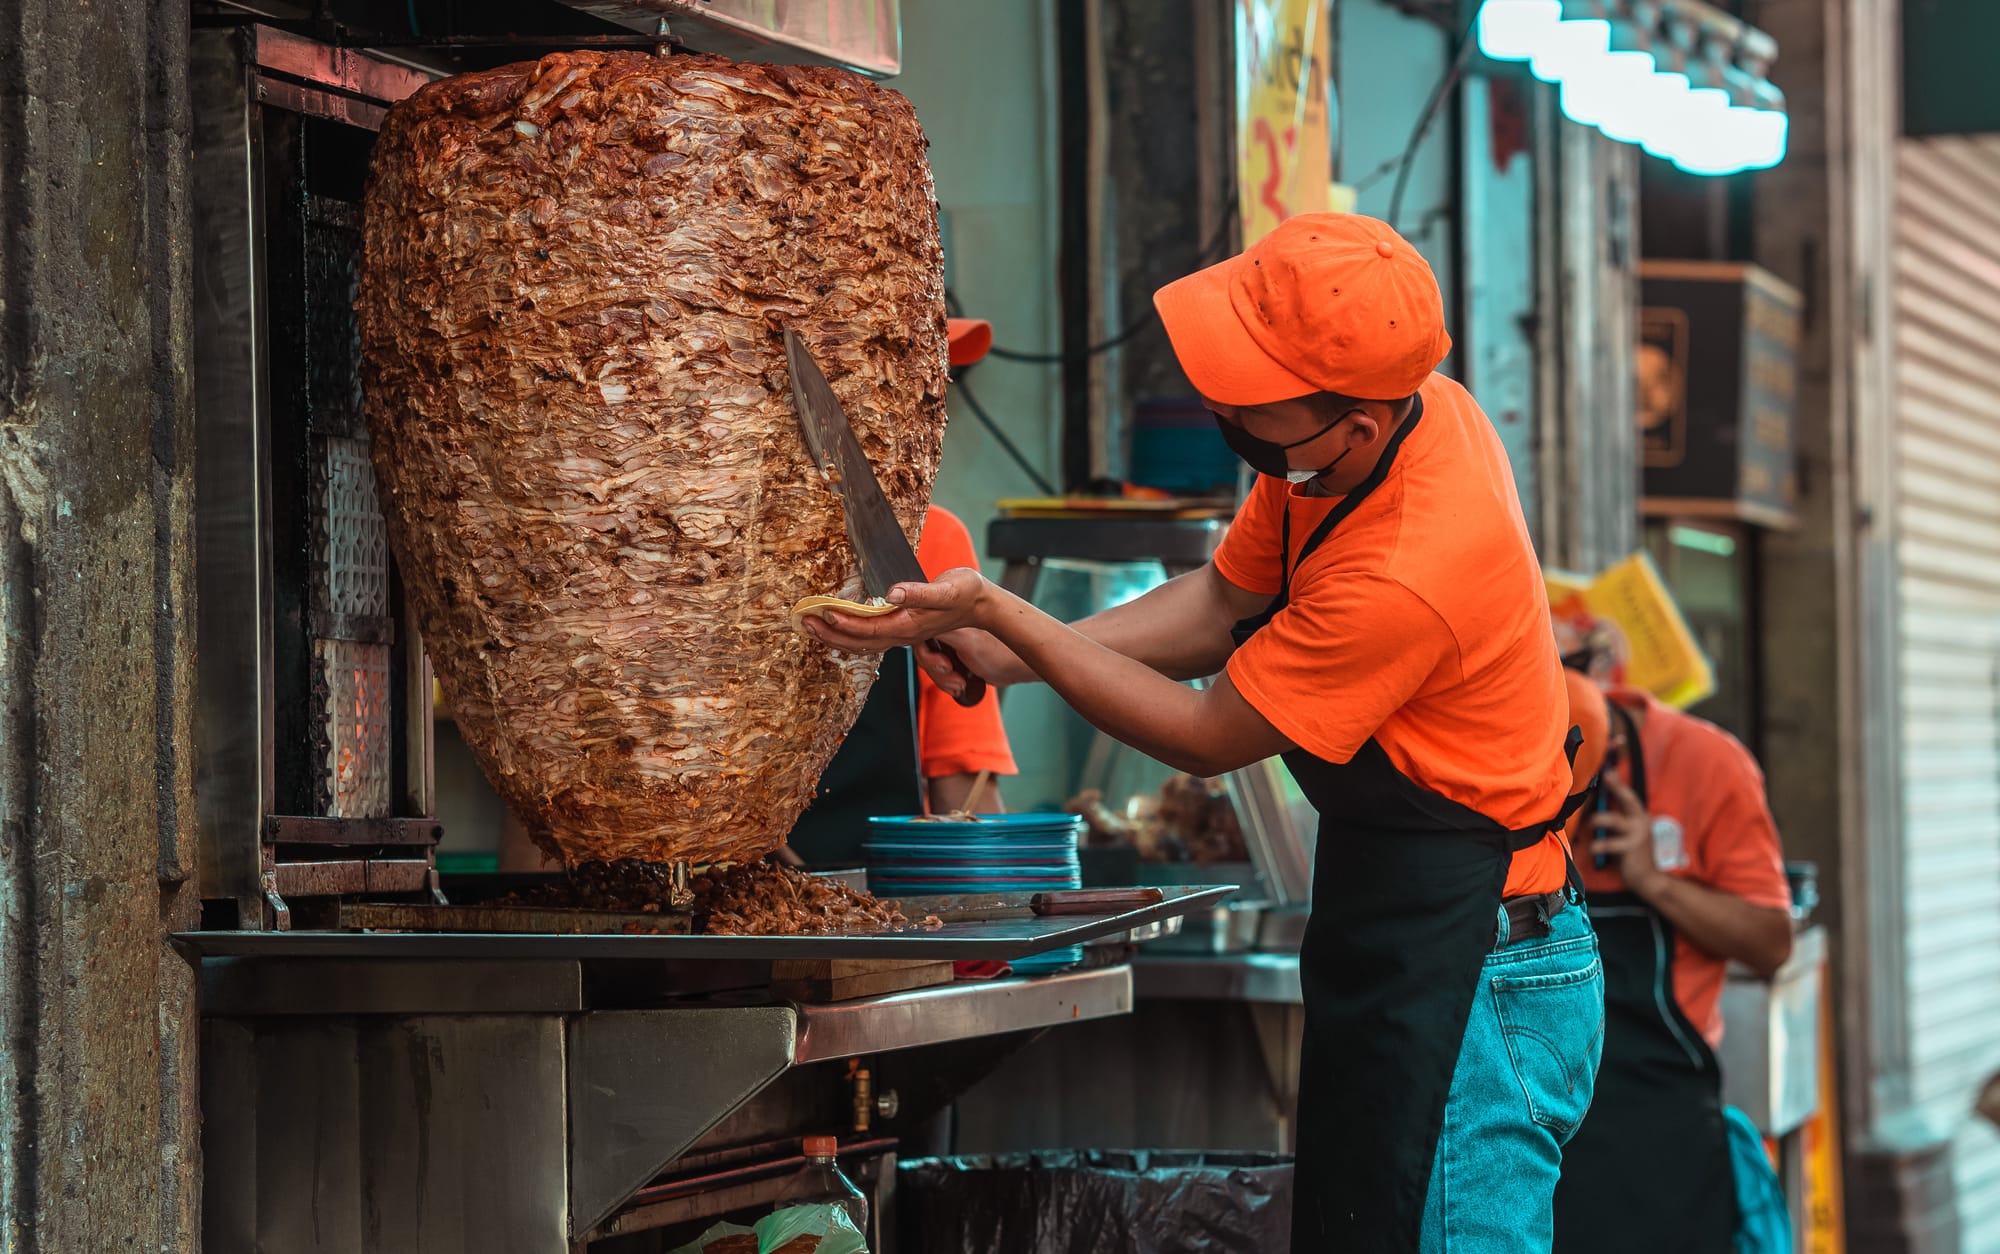 What Is Al Pastor? A Guide to the Popular Mexican Food + Recipes